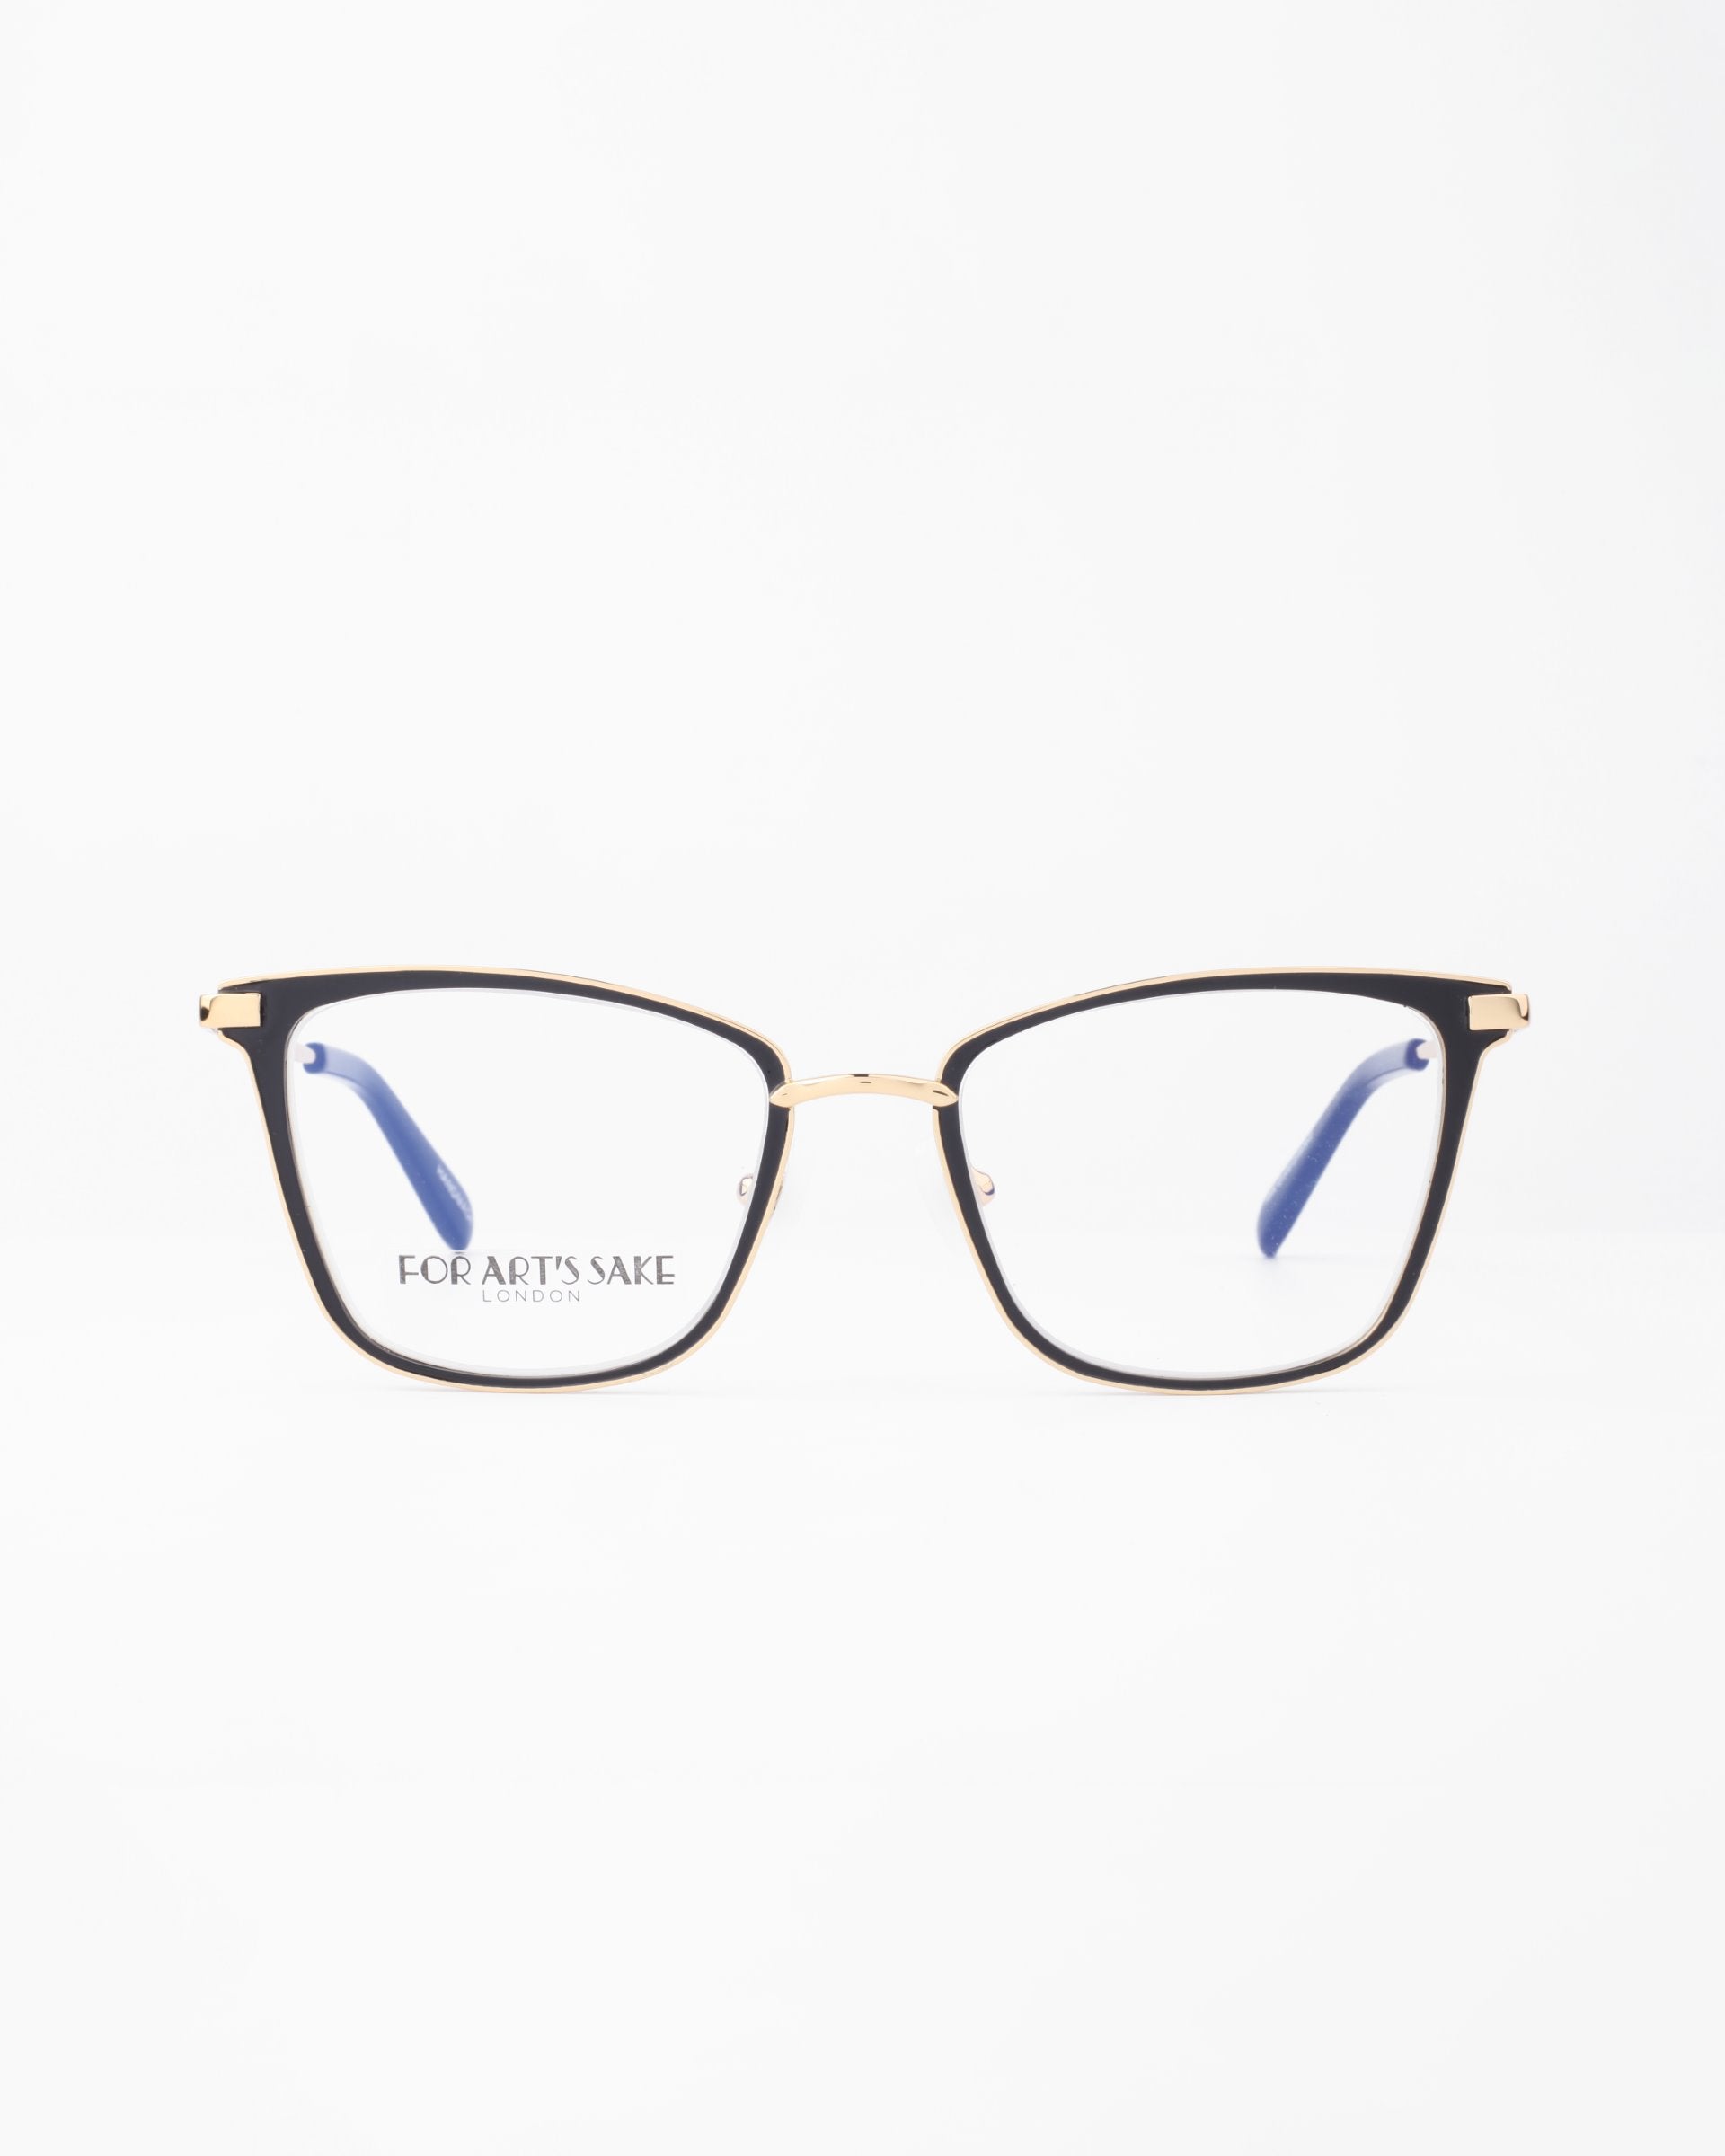 A pair of eyeglasses with thin 18-karat gold-plated frames and black accents on the upper rims are displayed against a white background. The temples' tips are blue, and the brand name "For Art's Sake®" is visible on the left lens. These stylish Windsor frames also feature a blue light filter for added eye protection.